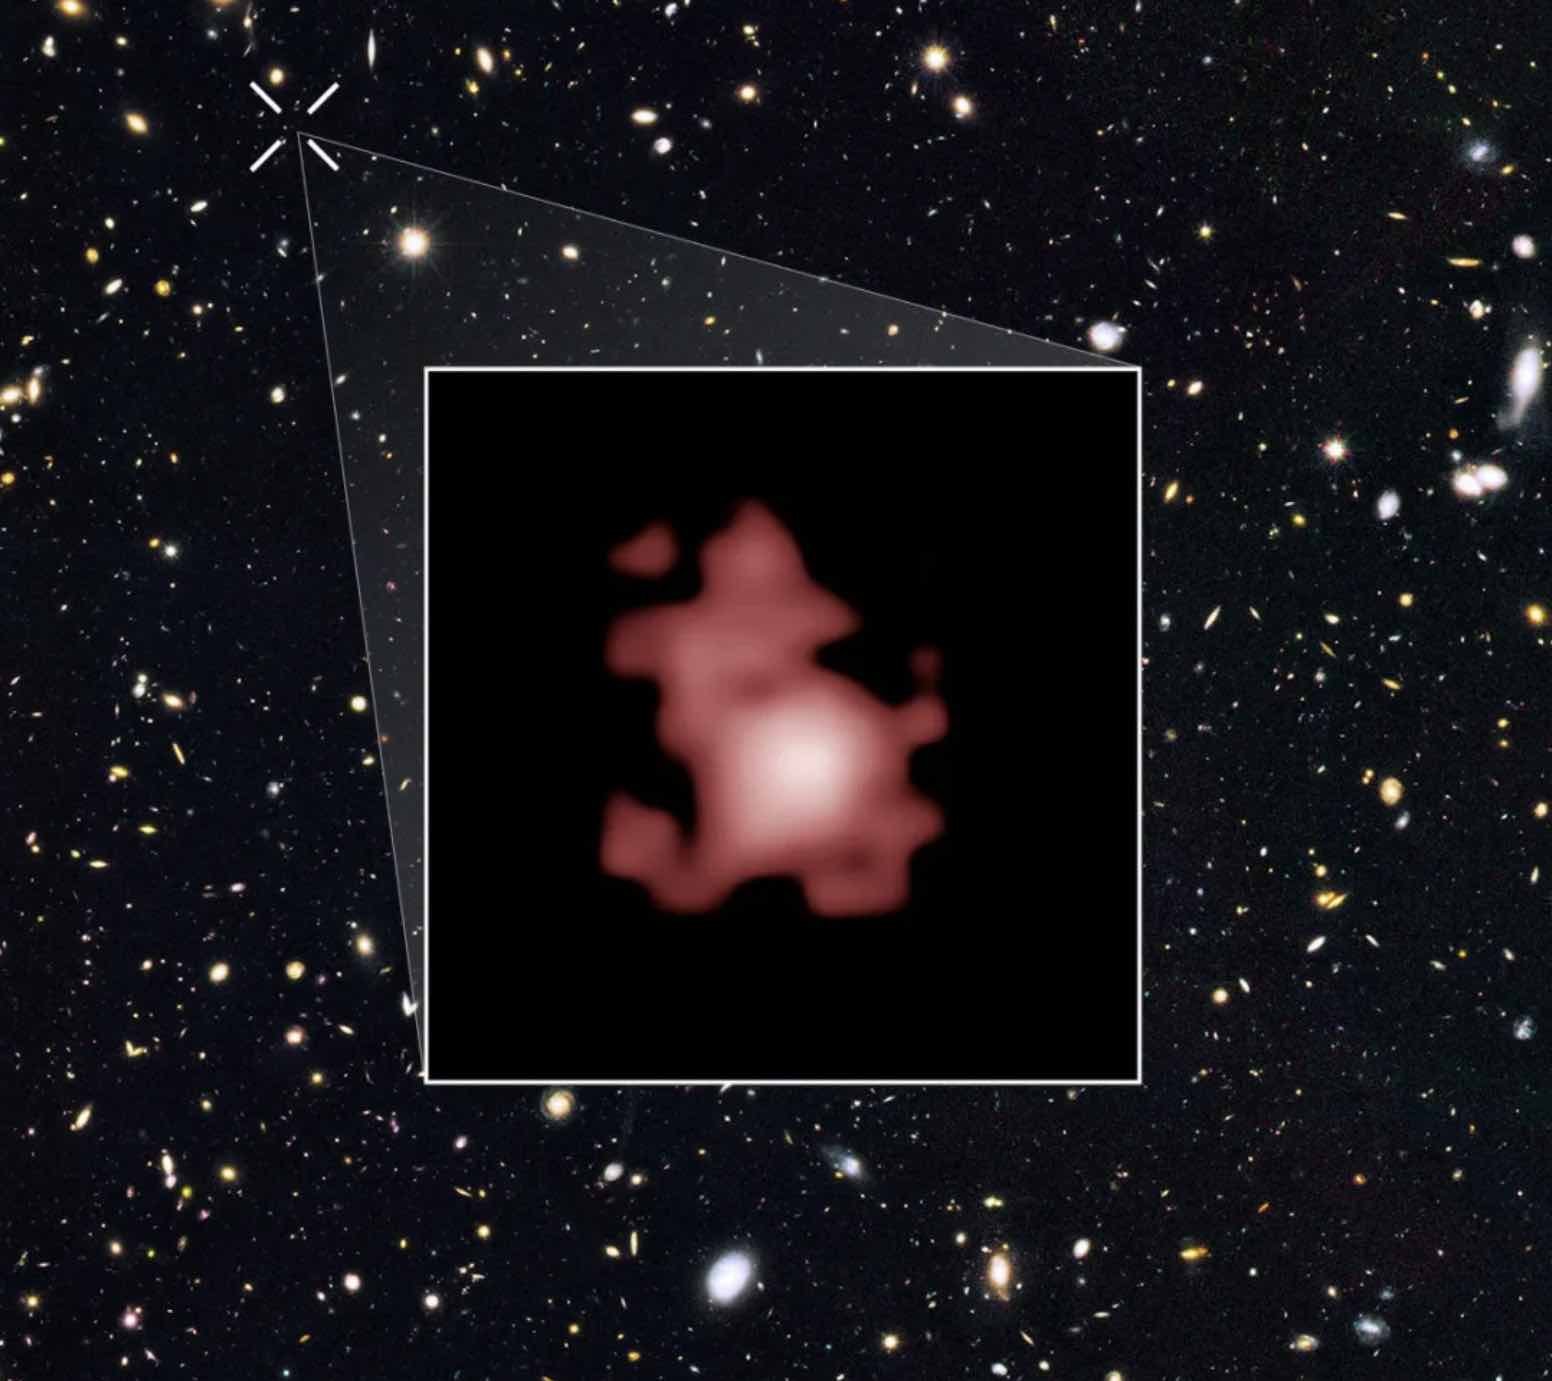 James Webb Space Telescope Has Detected Something Enormous Hiding in One of the Farthest Known Galaxies